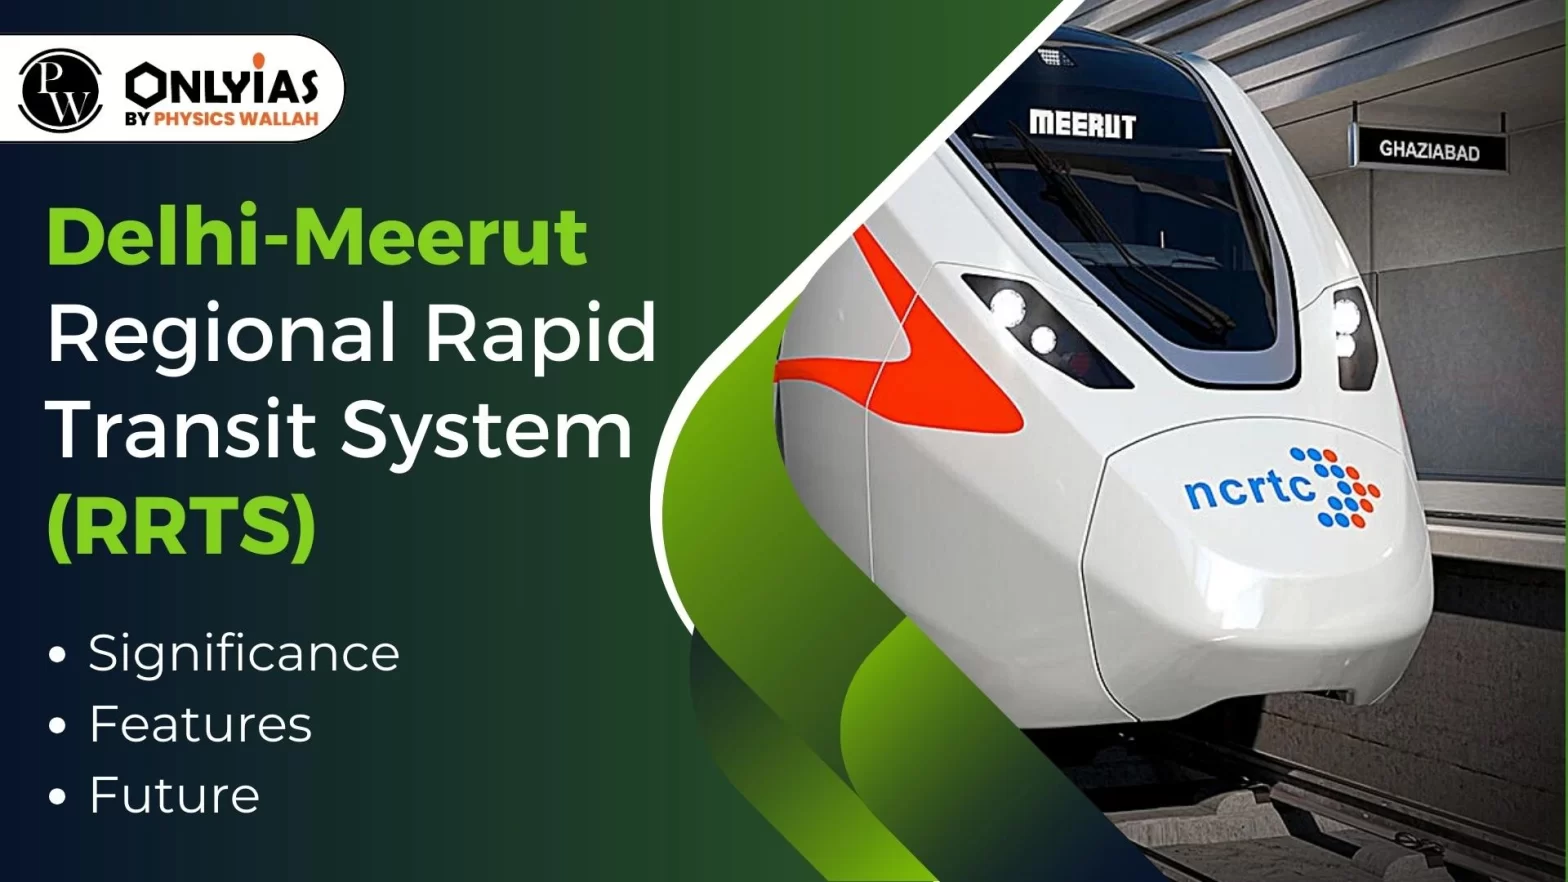 Delhi-Meerut Regional Rapid Transit System (RRTS): Significance, Features, and Future